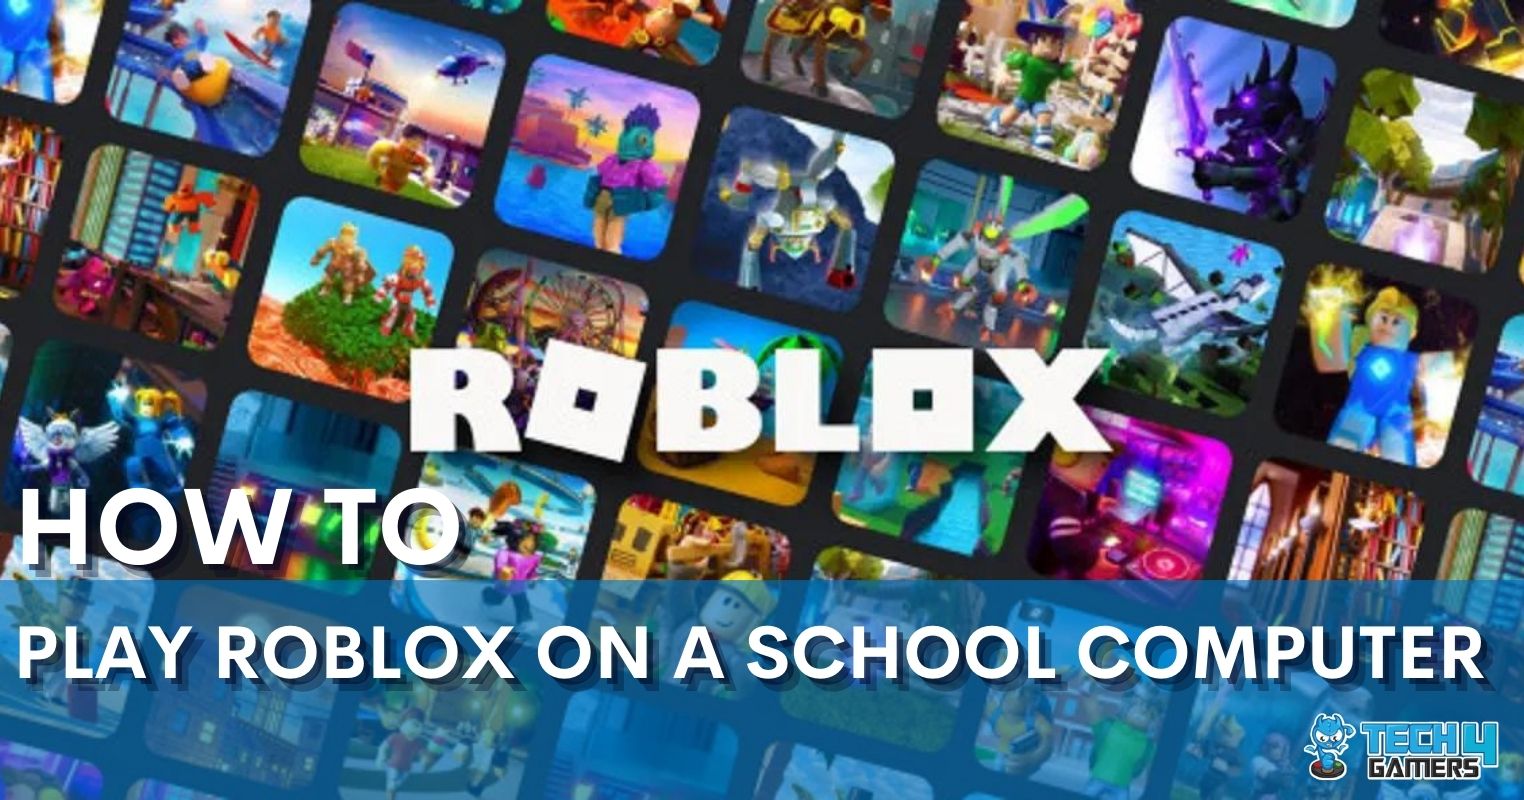 How to Play Roblox Without Downloading It (2023) 